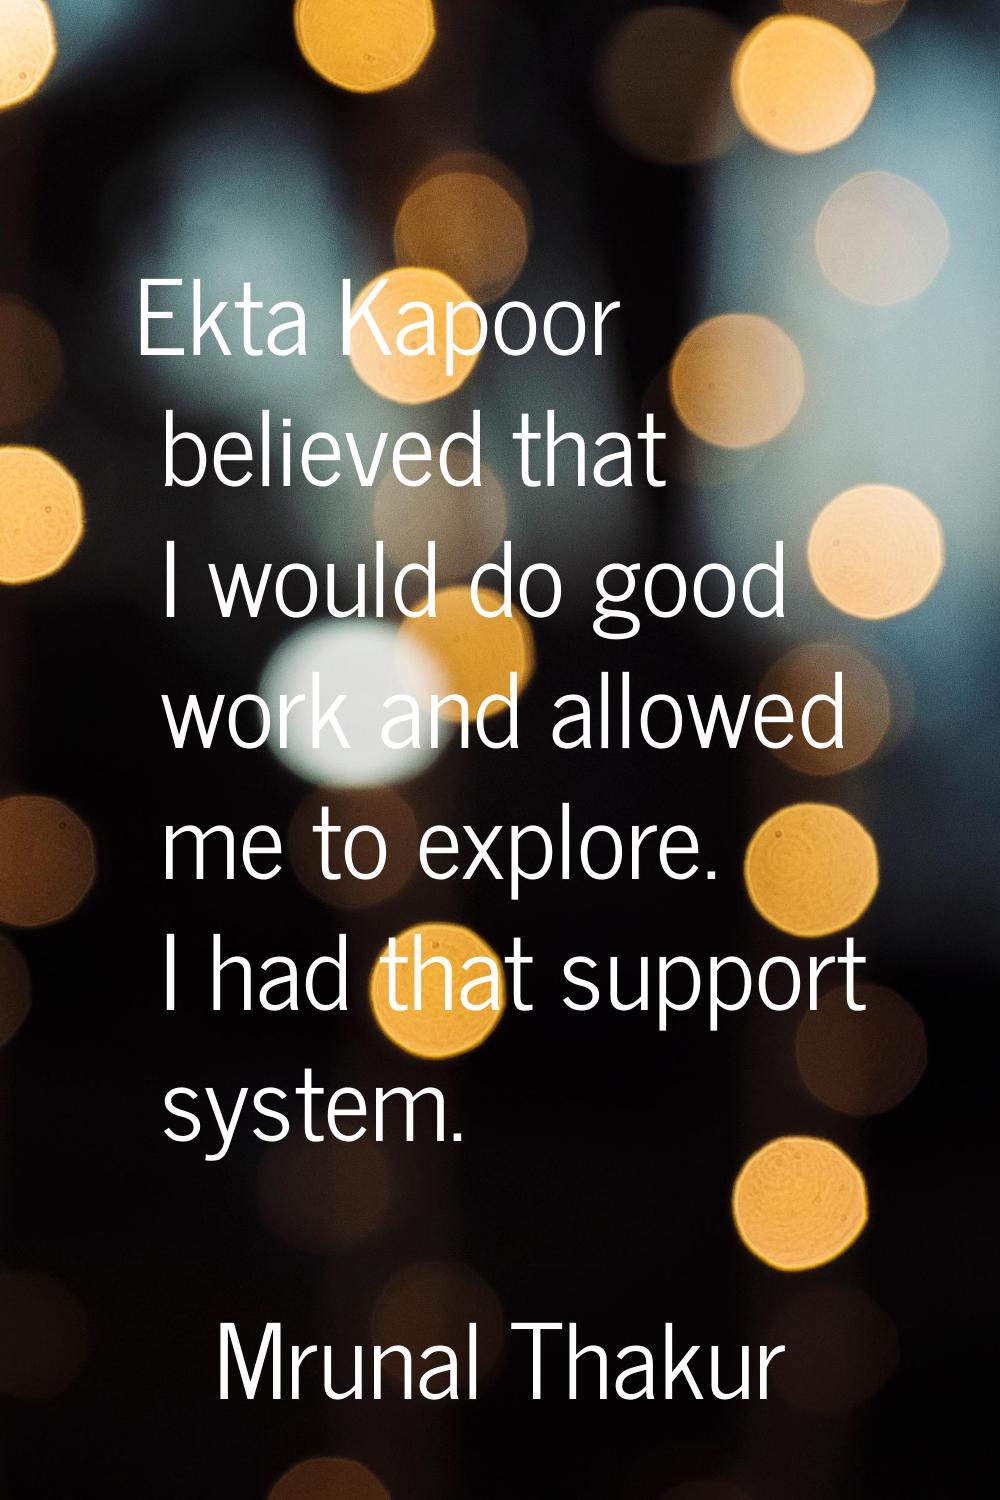 Ekta Kapoor believed that I would do good work and allowed me to explore. I had that support system